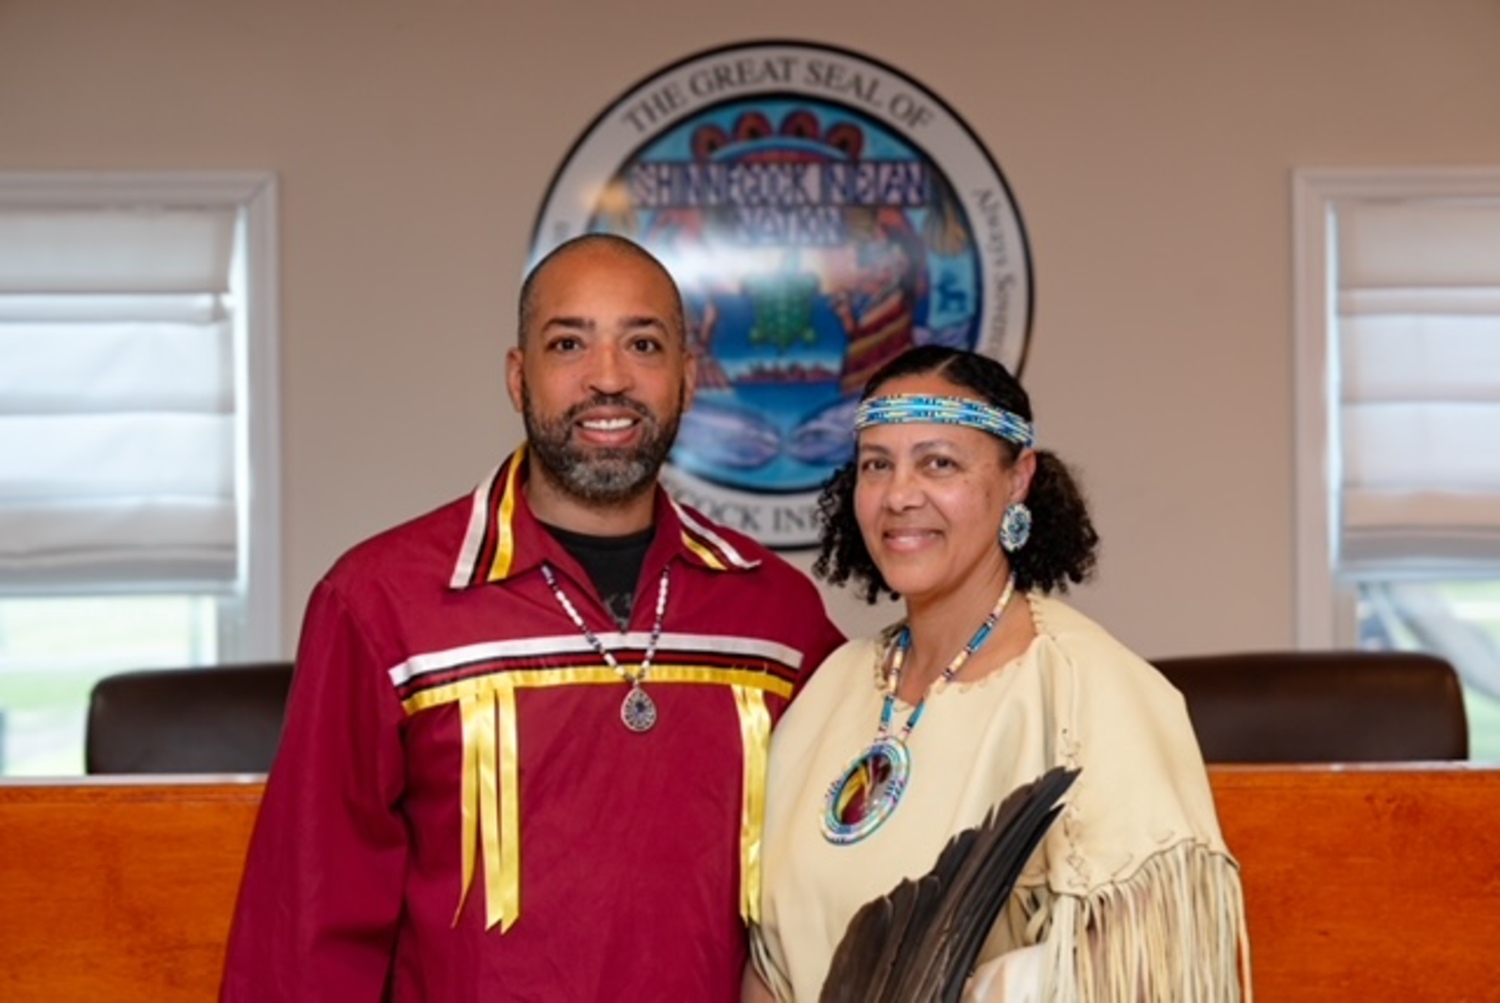 Lisa Goree was sworn in on Tuesday night as the new chair of the Shinnecock Nation Council of Trustees. Goree became the first woman to serve in that role.  She replaces Bryan Polite, left, the previous chairman, who stepped down with one year left in his term. REBEKAH PHOENIX WISE